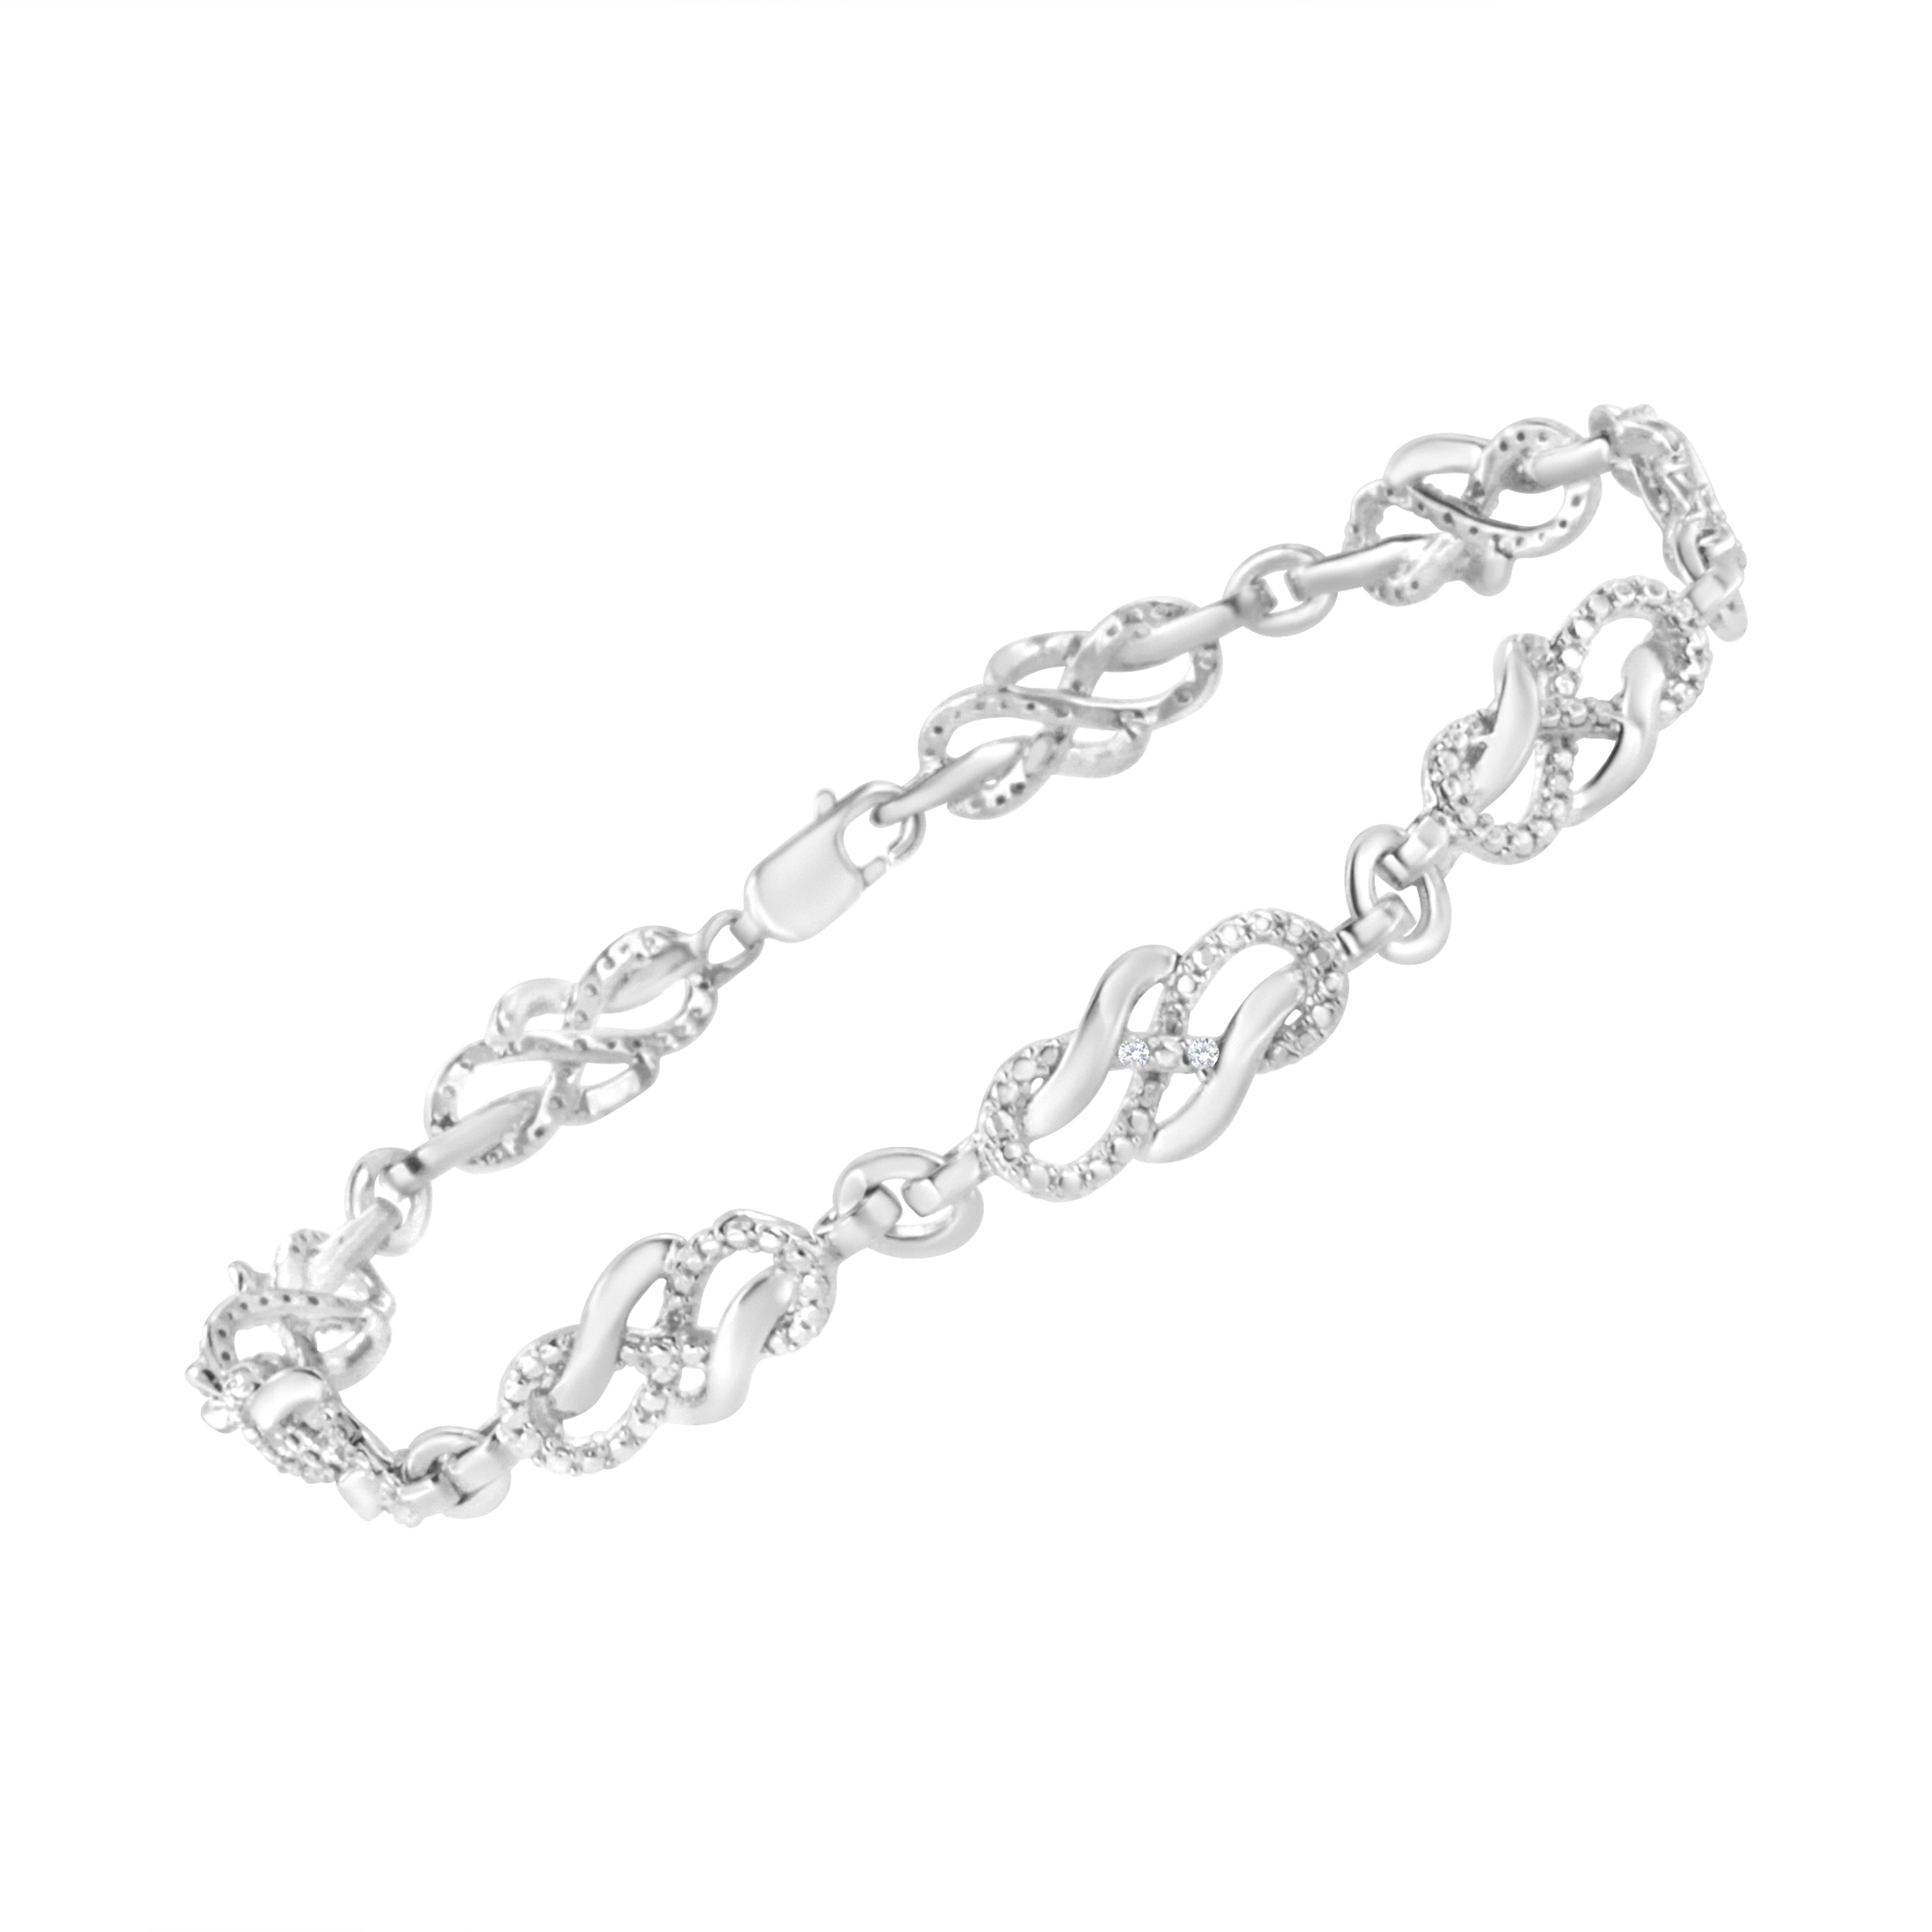 Treat yourself to this elegant and refined infinity link bracelet. Created in cool .925 sterling silver, this piece is designed with silver infinity links, alternating set with round-cut diamonds. This prong set, diamond accent piece is 7.25 inches